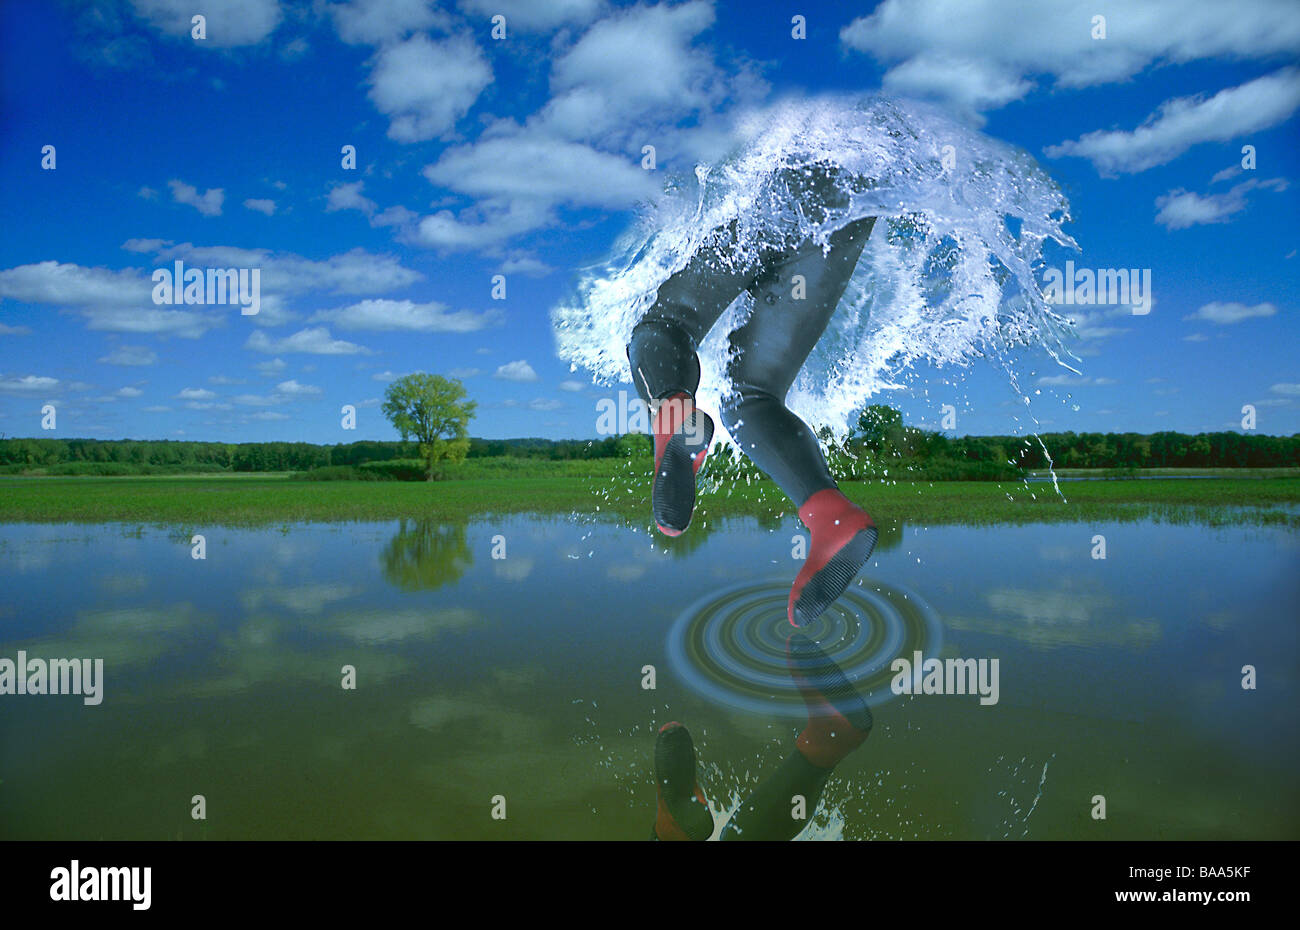 A diver makes a splash into the clouds and sky and creates a spiral in the lake below. Stock Photo